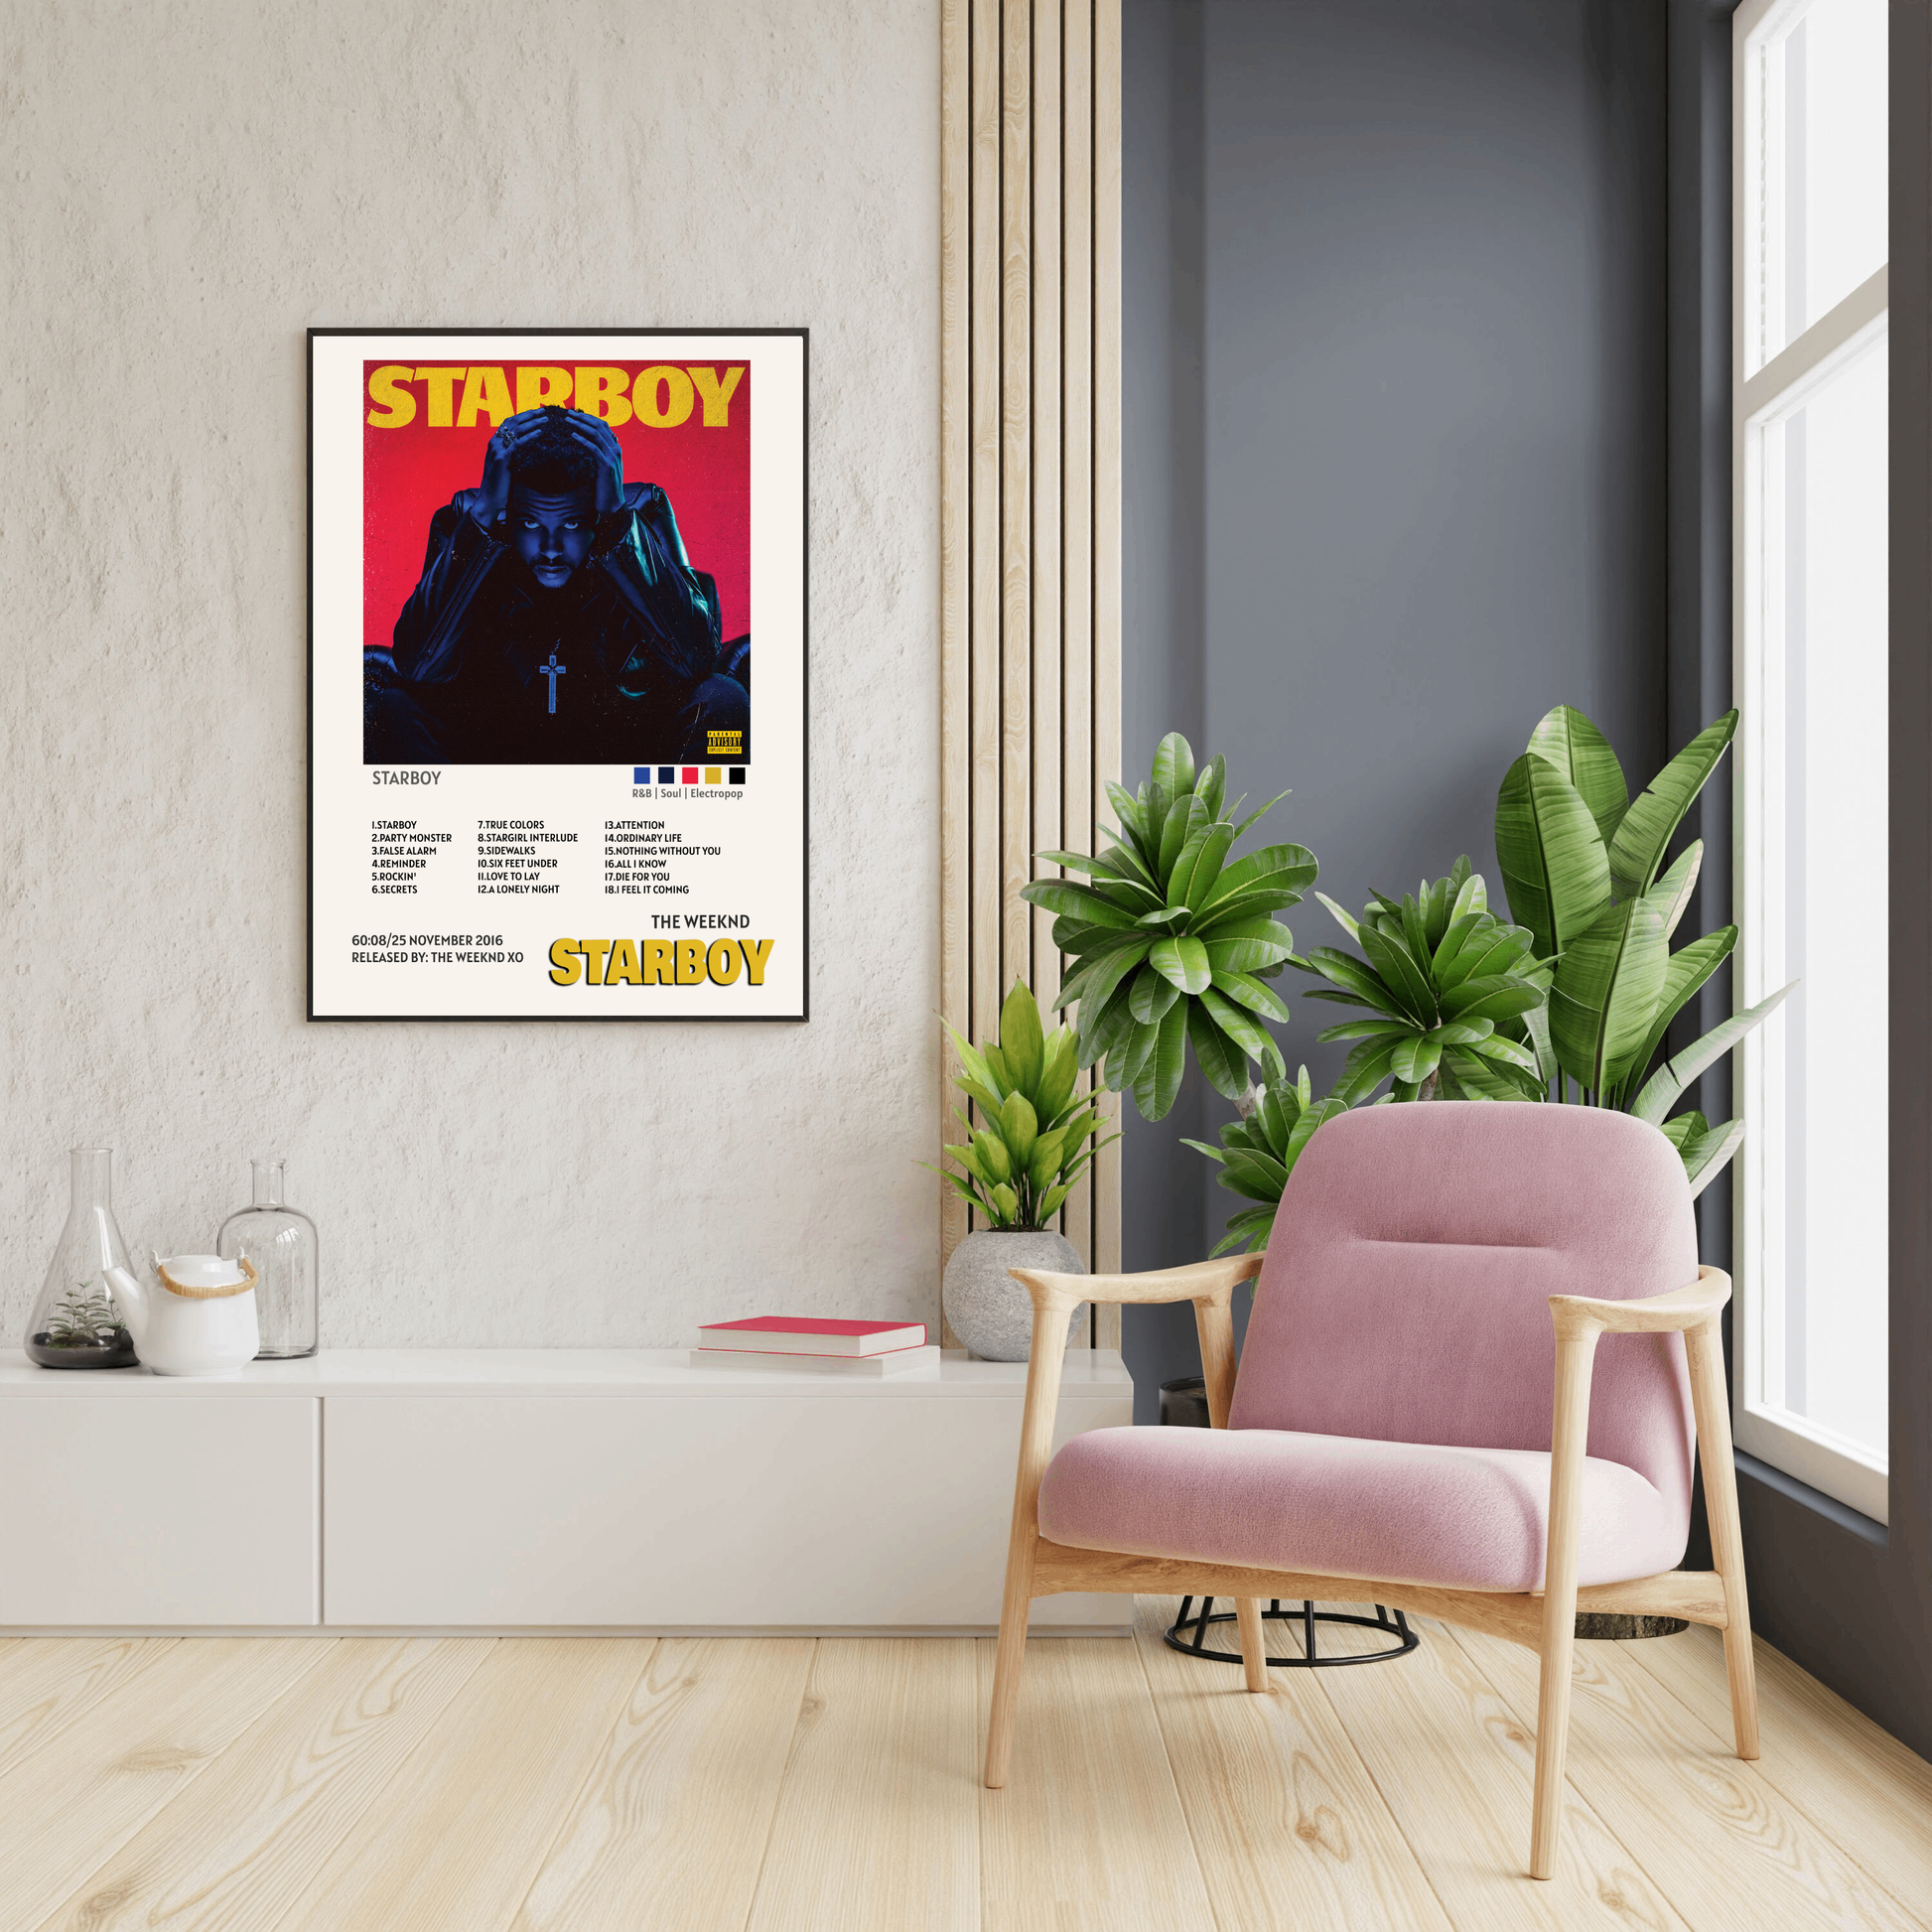 The Weeknd Starboy Art Music Album Poster HD Print 12 16 20 24 Sizes